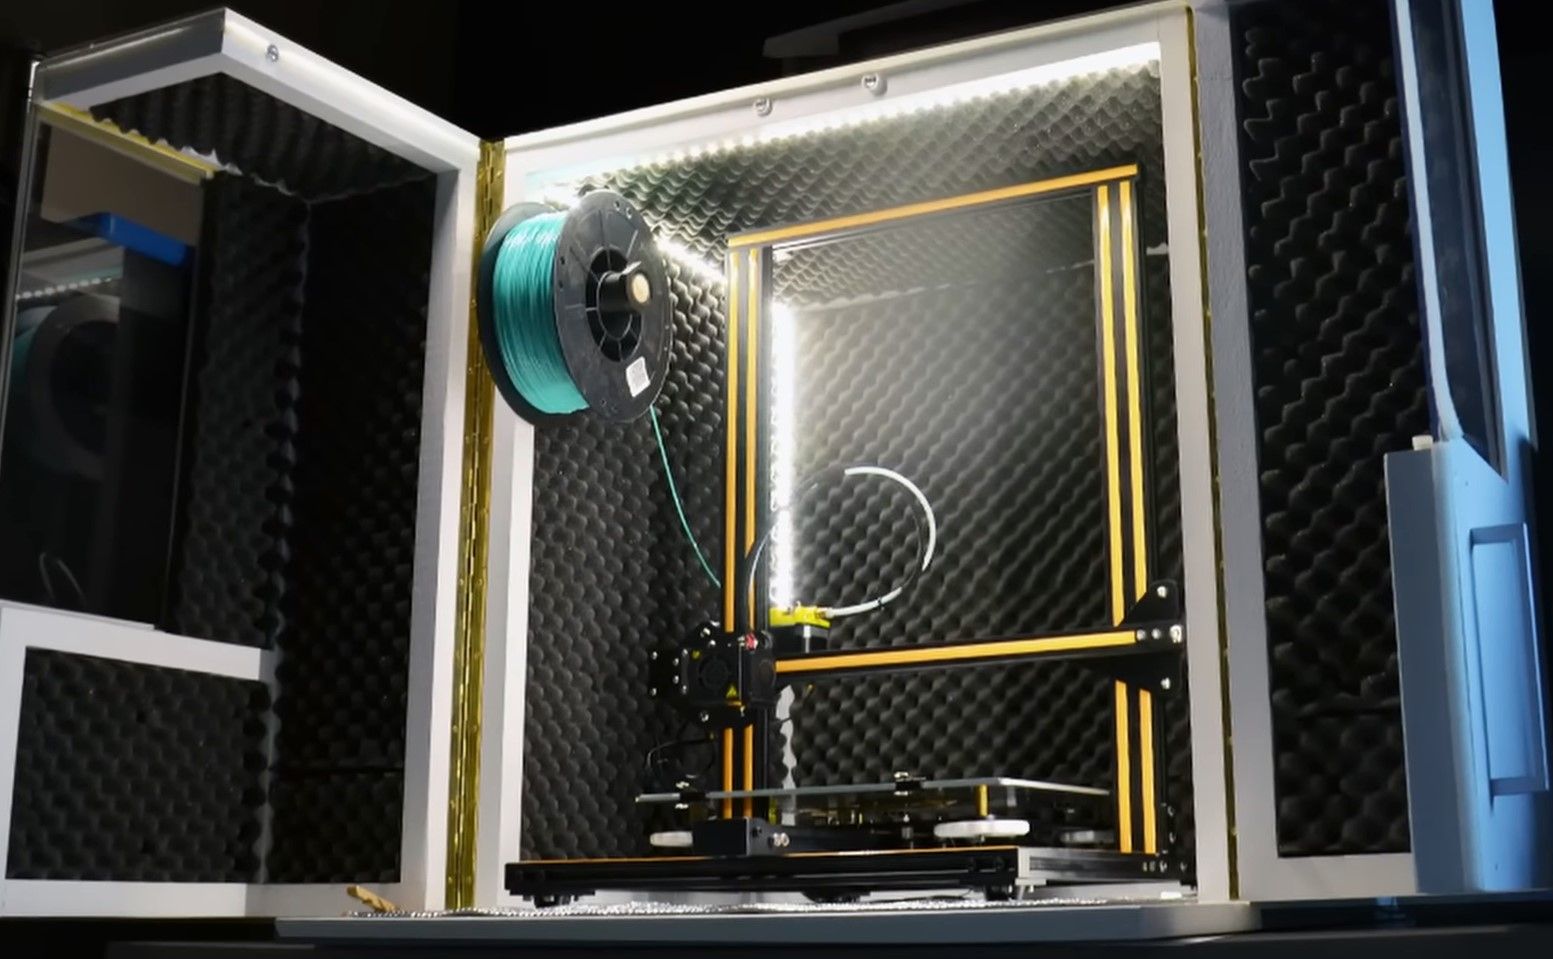 A 3D printer inside an enclosure that has been opened